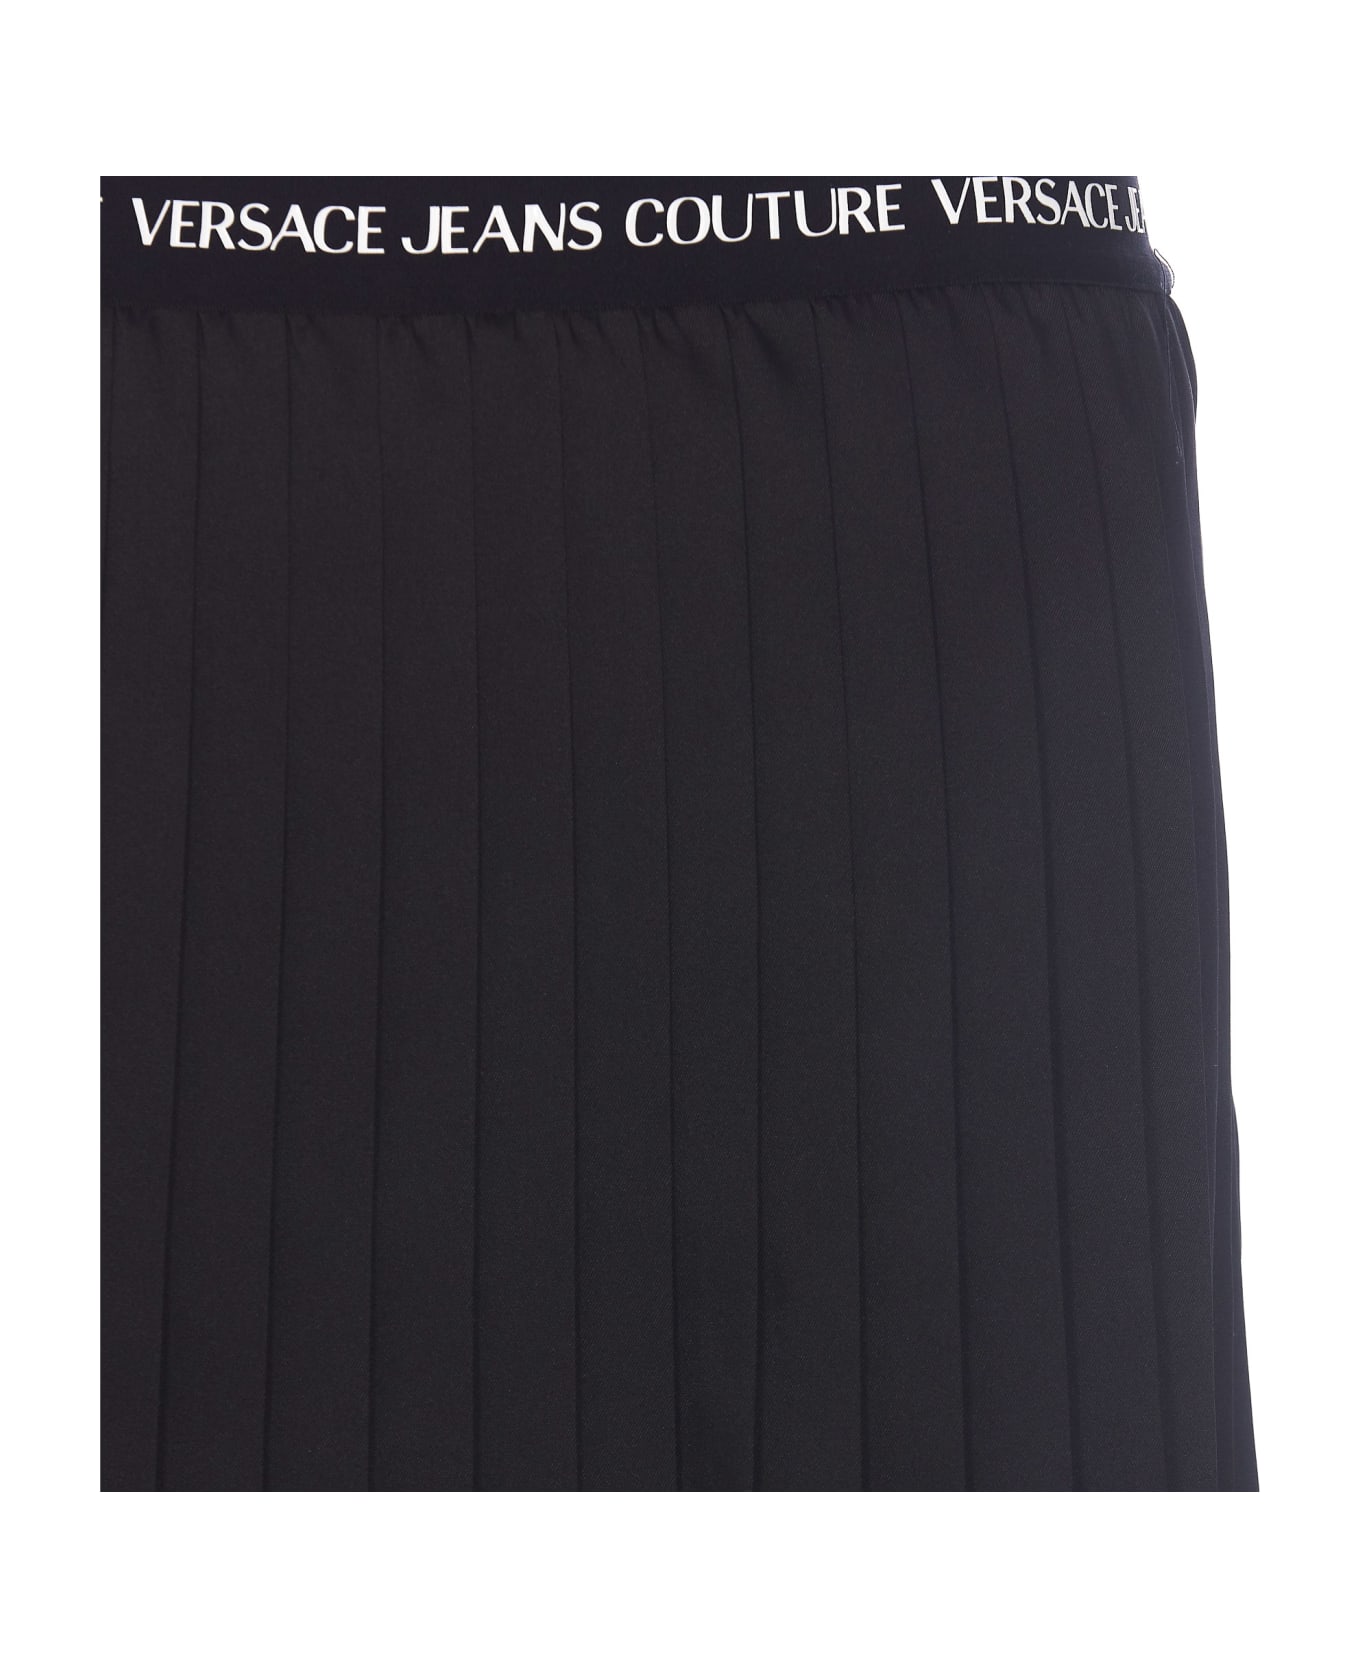 Versace Jeans Couture Leggings - 899